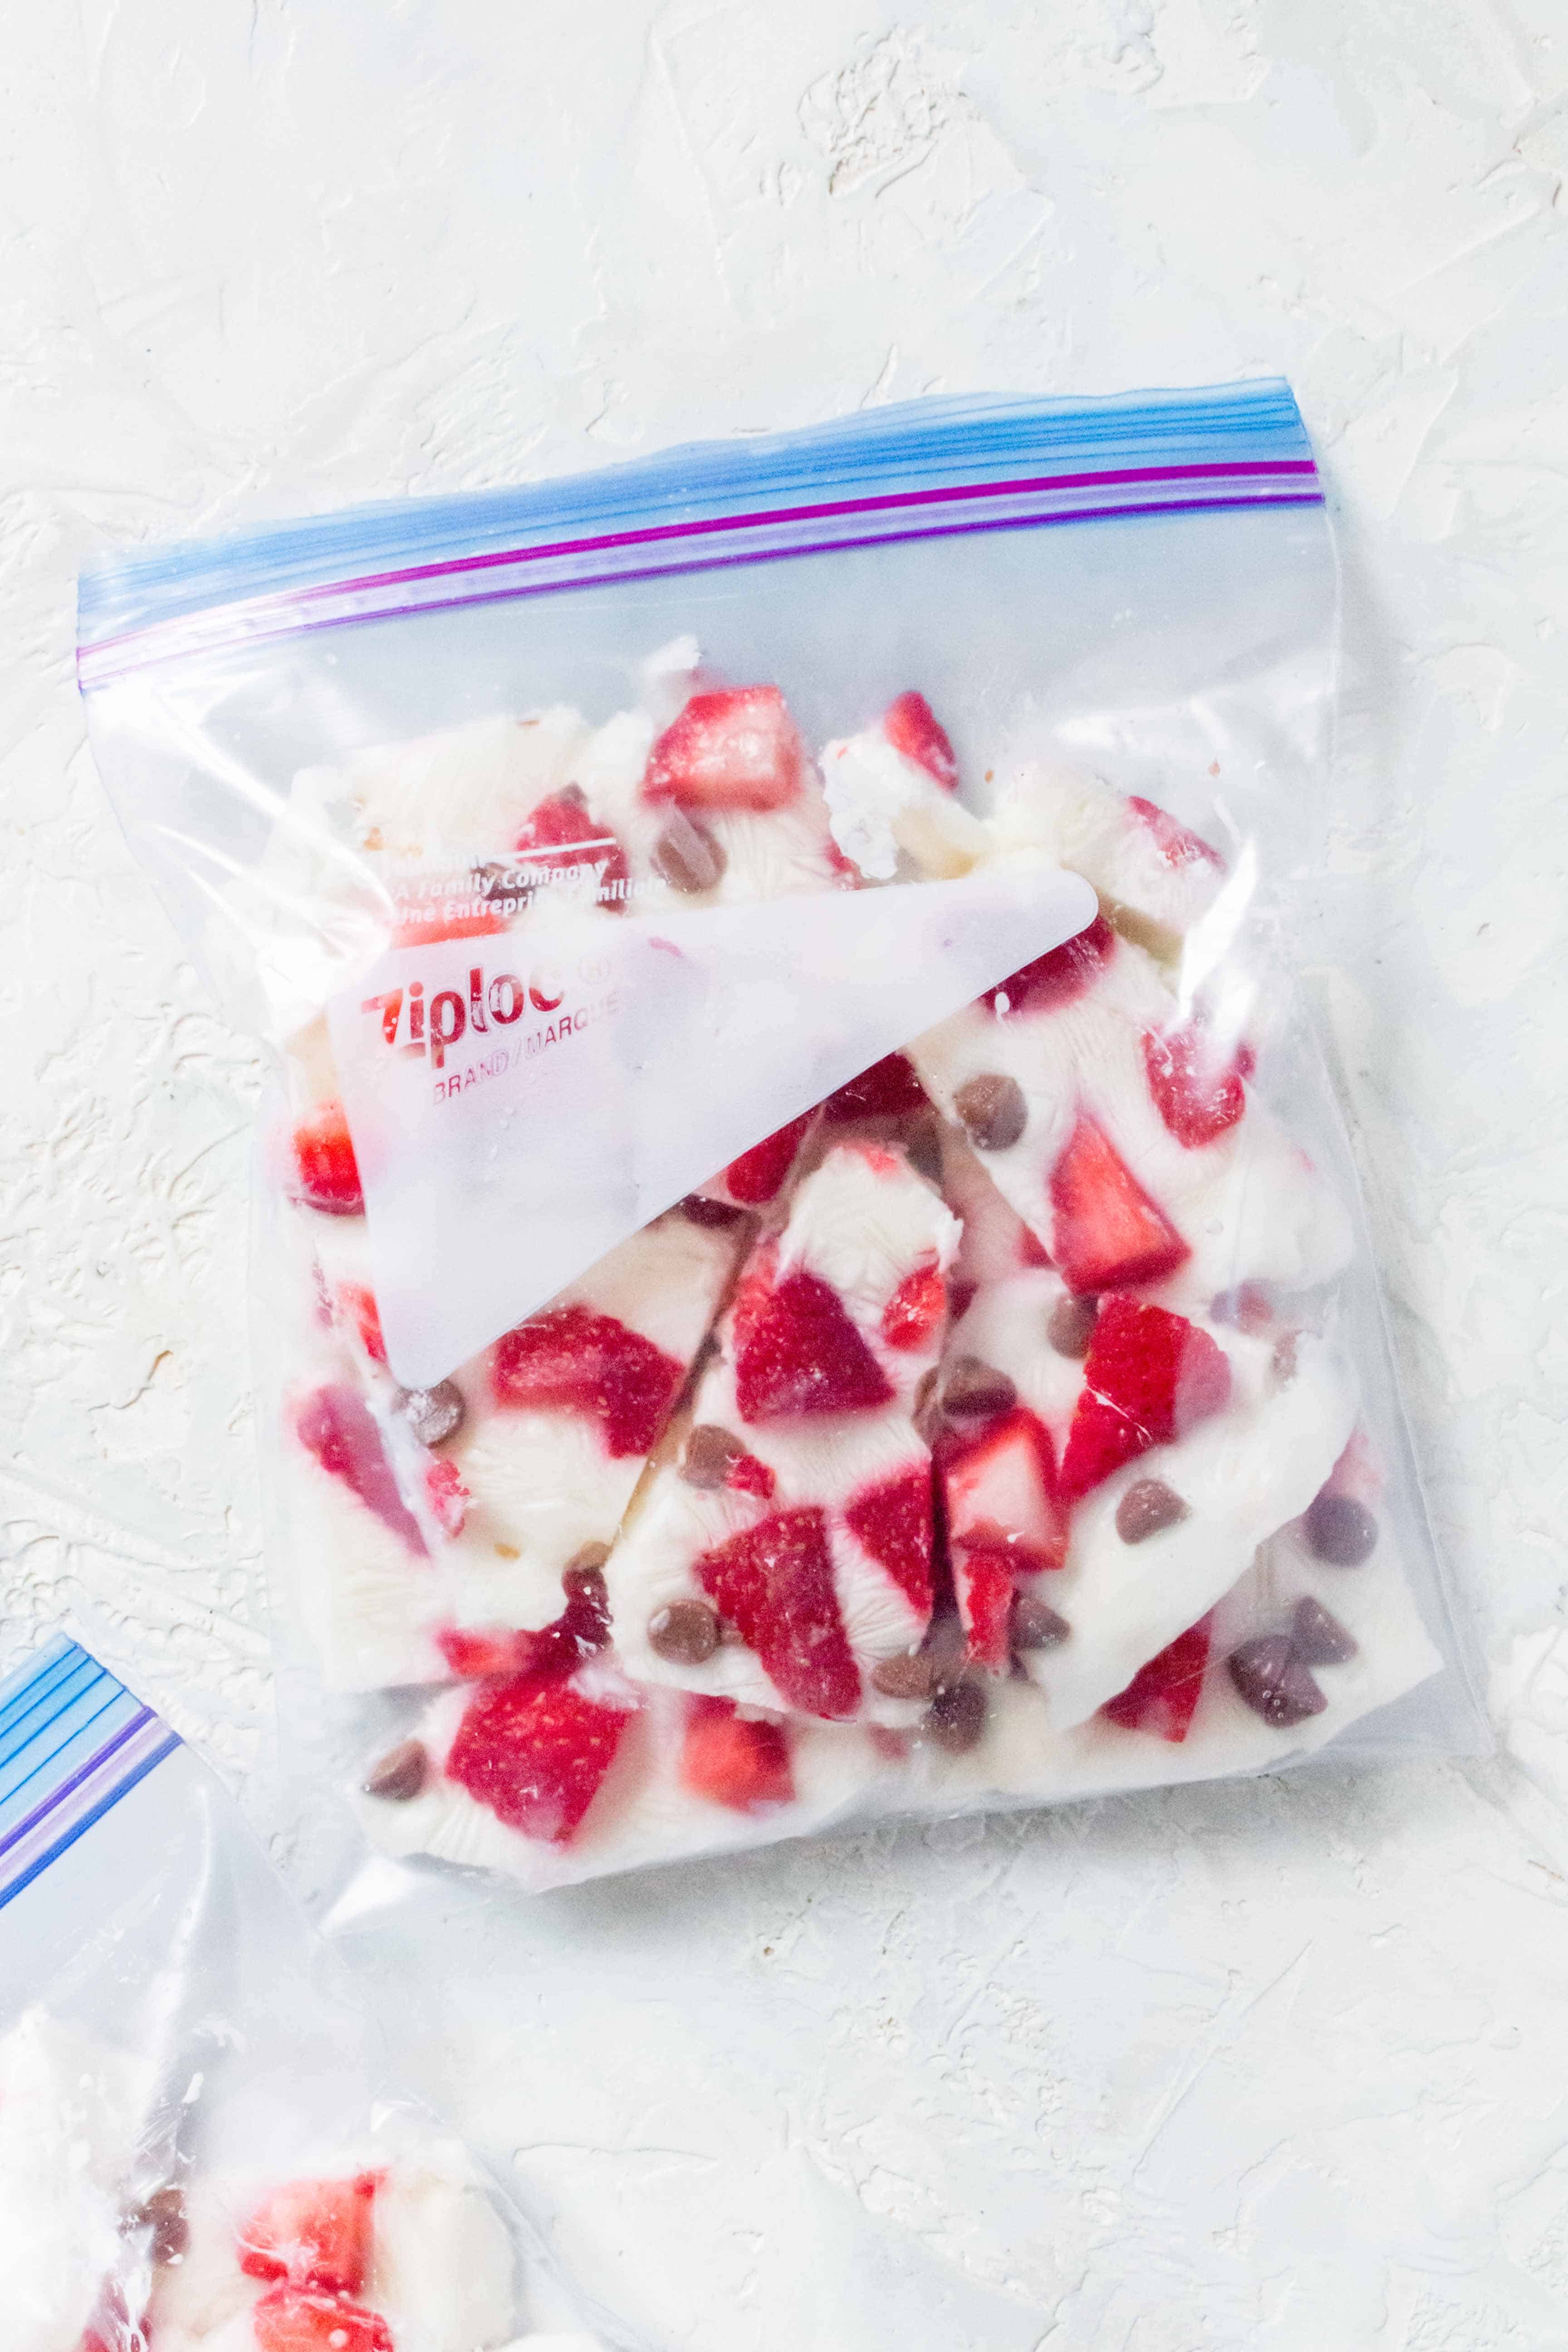 This Frozen Yogurt Bark with Strawberries and Chocolate Chips is the perfect make ahead snack! Healthy, fun to eat, and easy to make! 